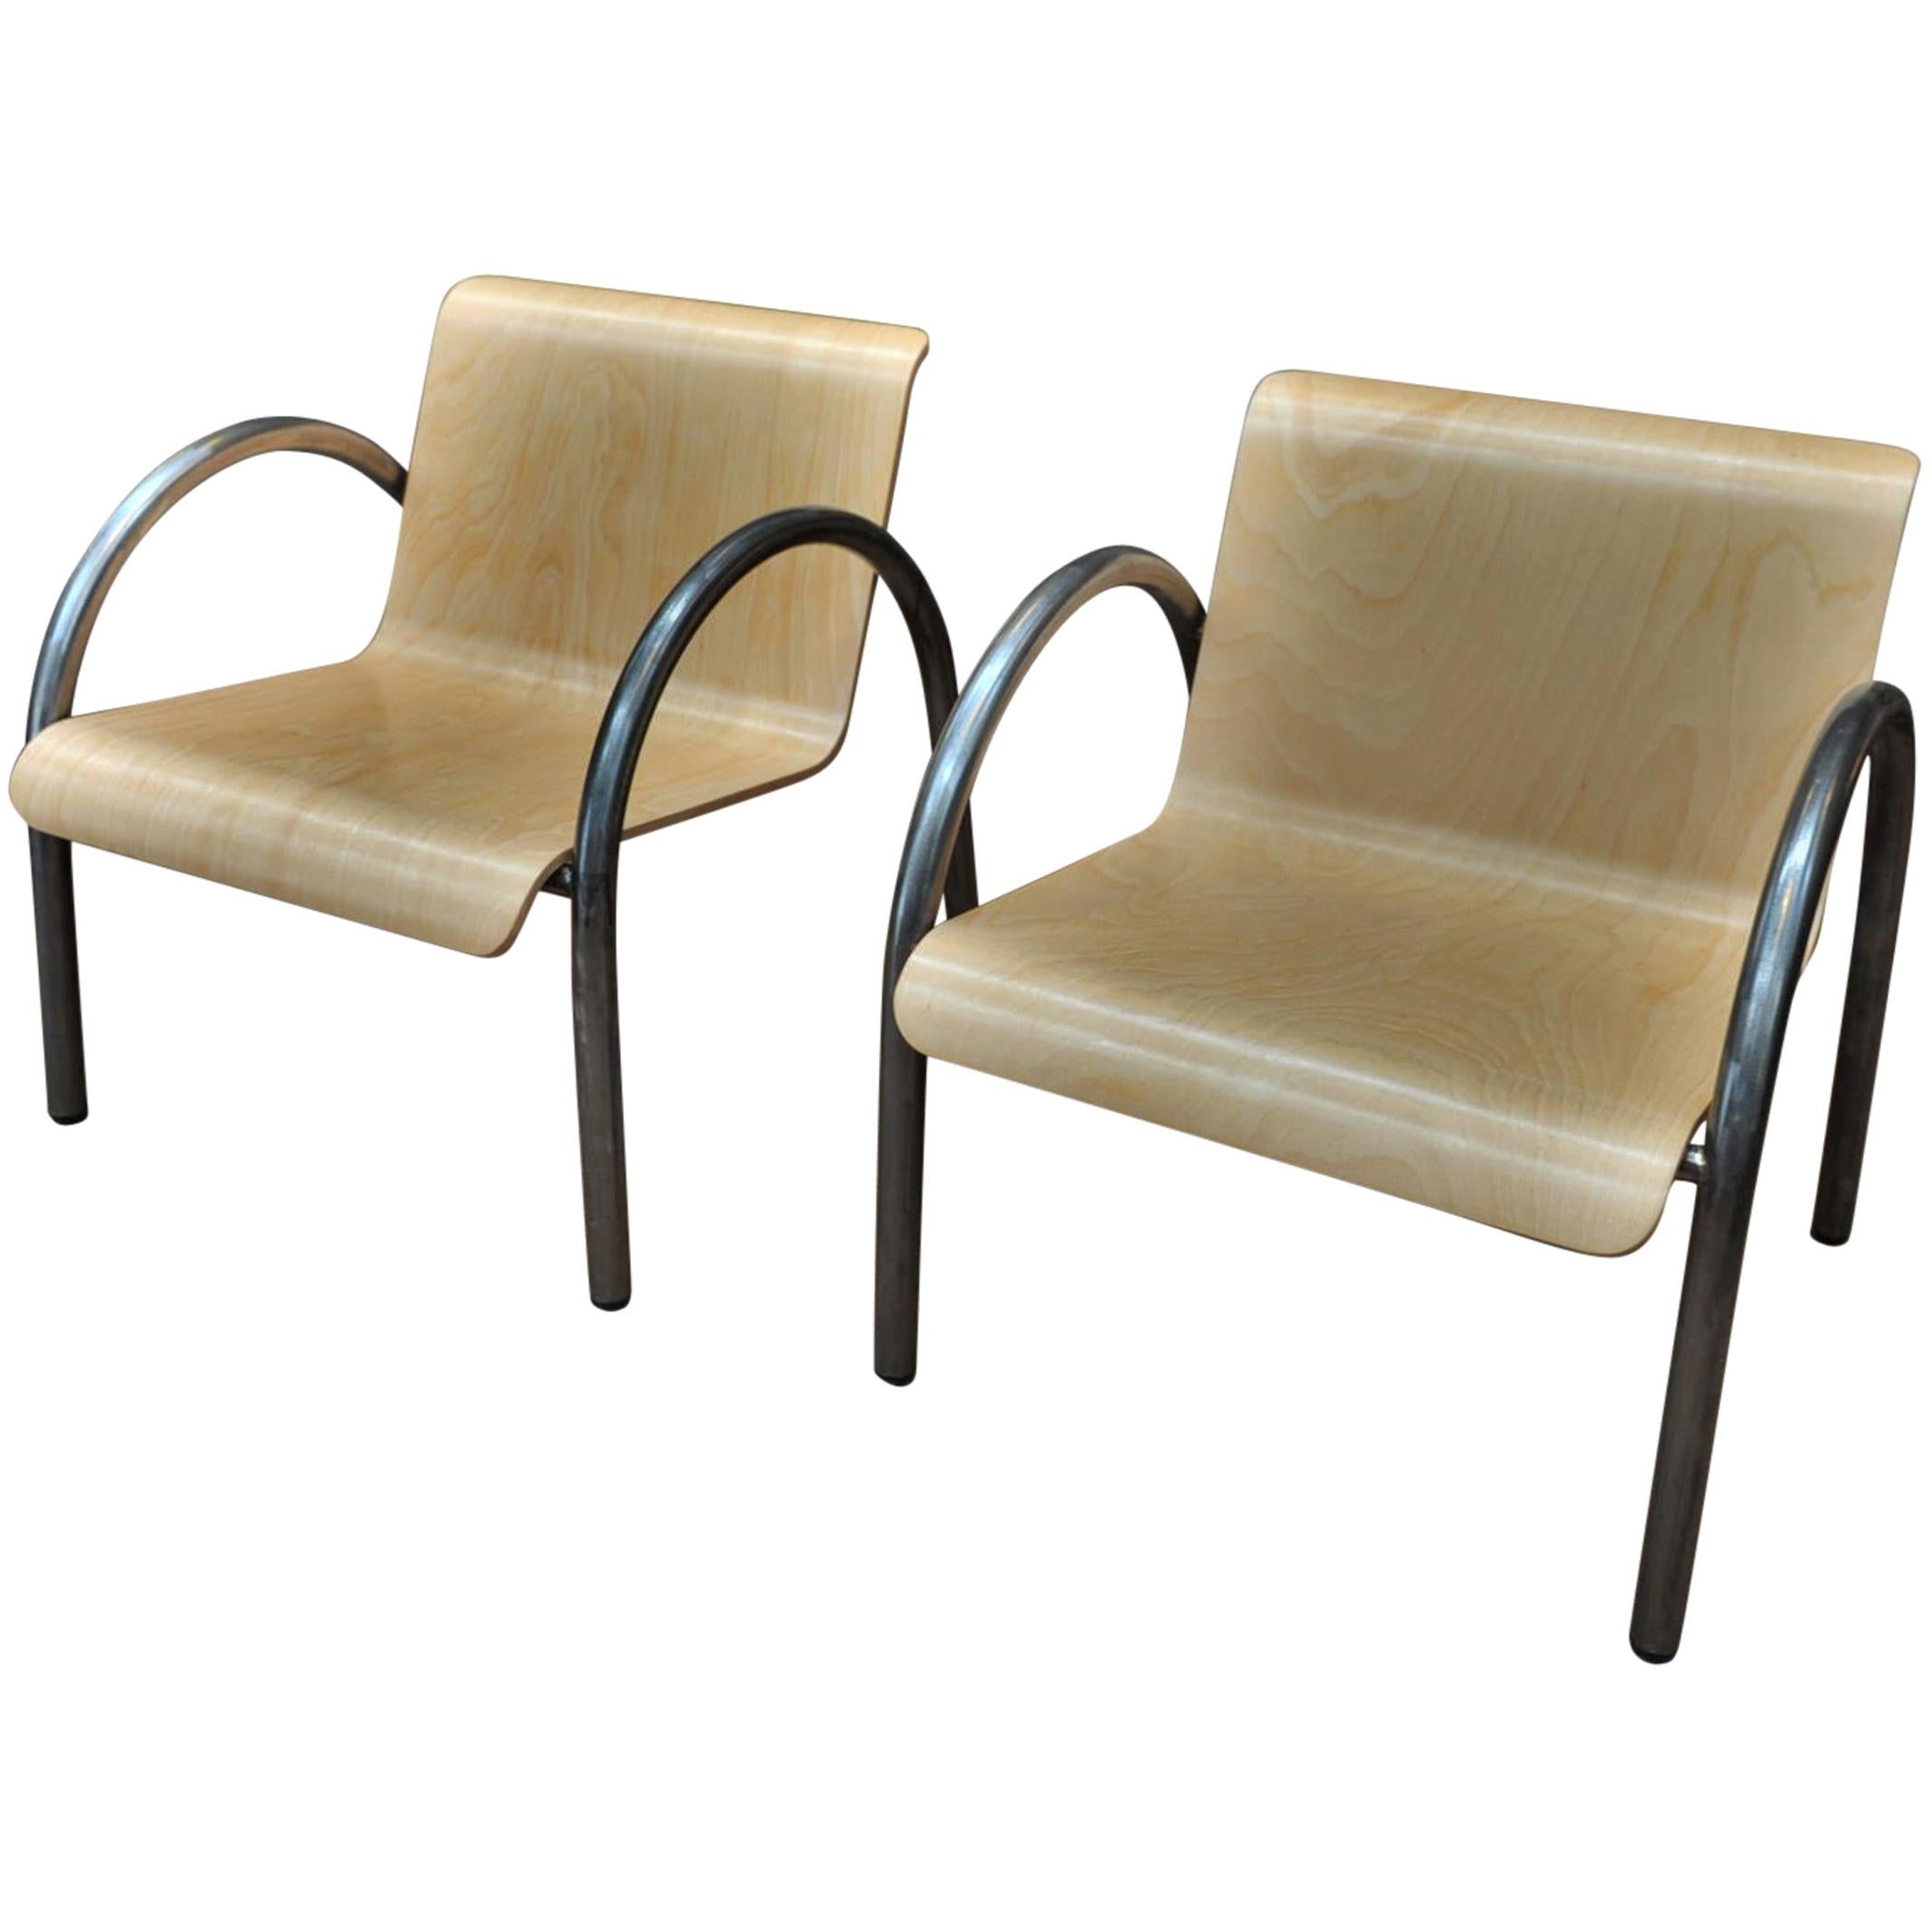 Pair of Mid-Century Metal and Wood Stack-Able Armchairs, 1950 For Sale